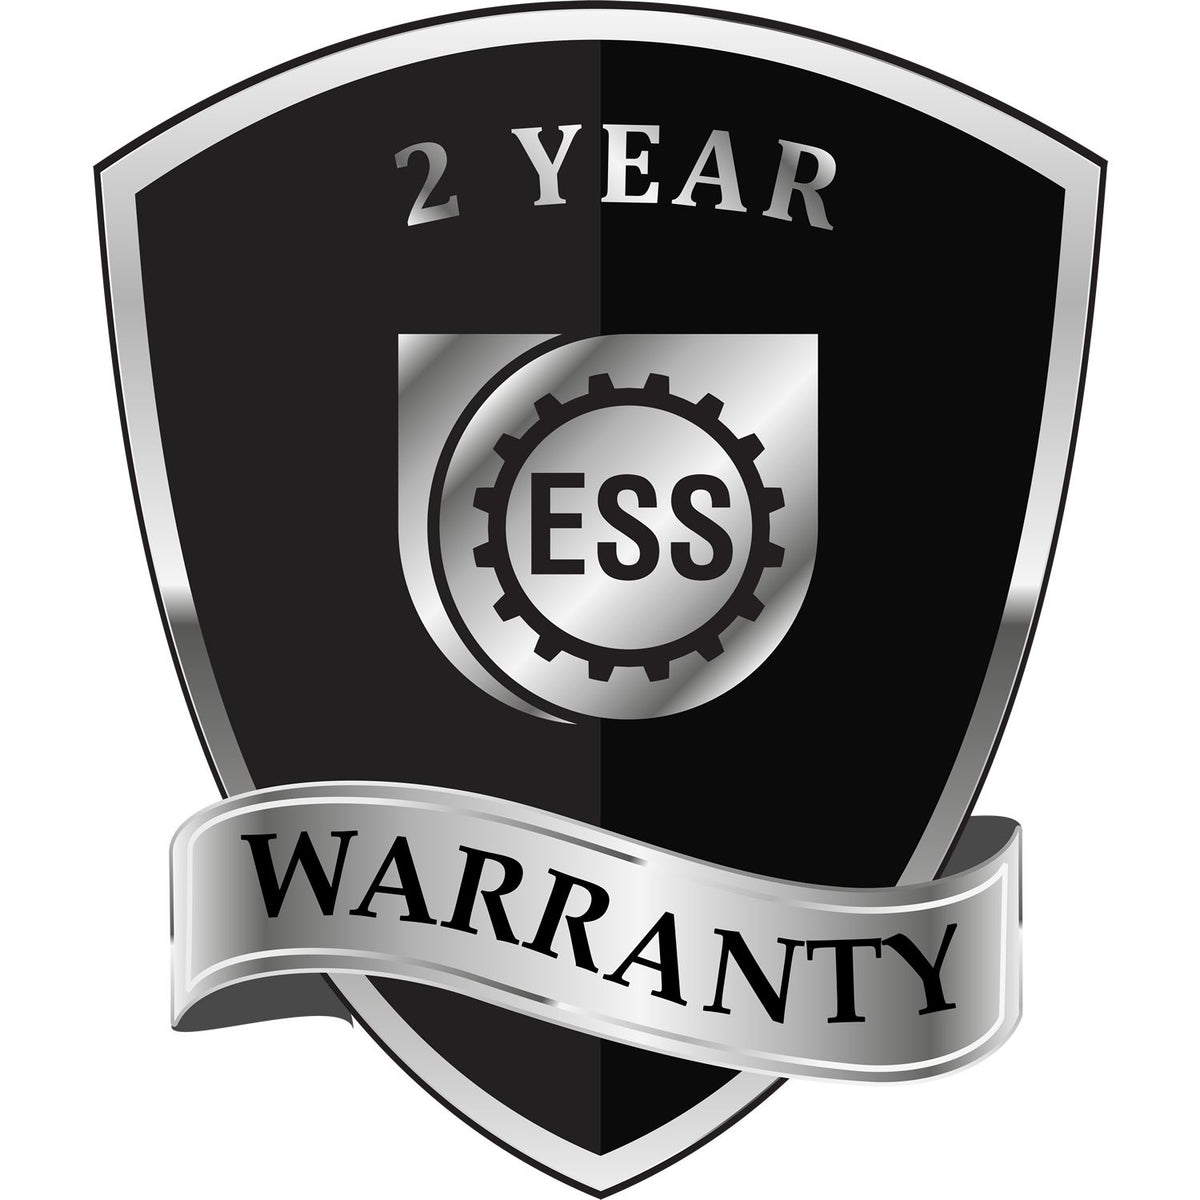 A badge or emblem showing a warranty icon for the New Mexico Engineer Desk Seal